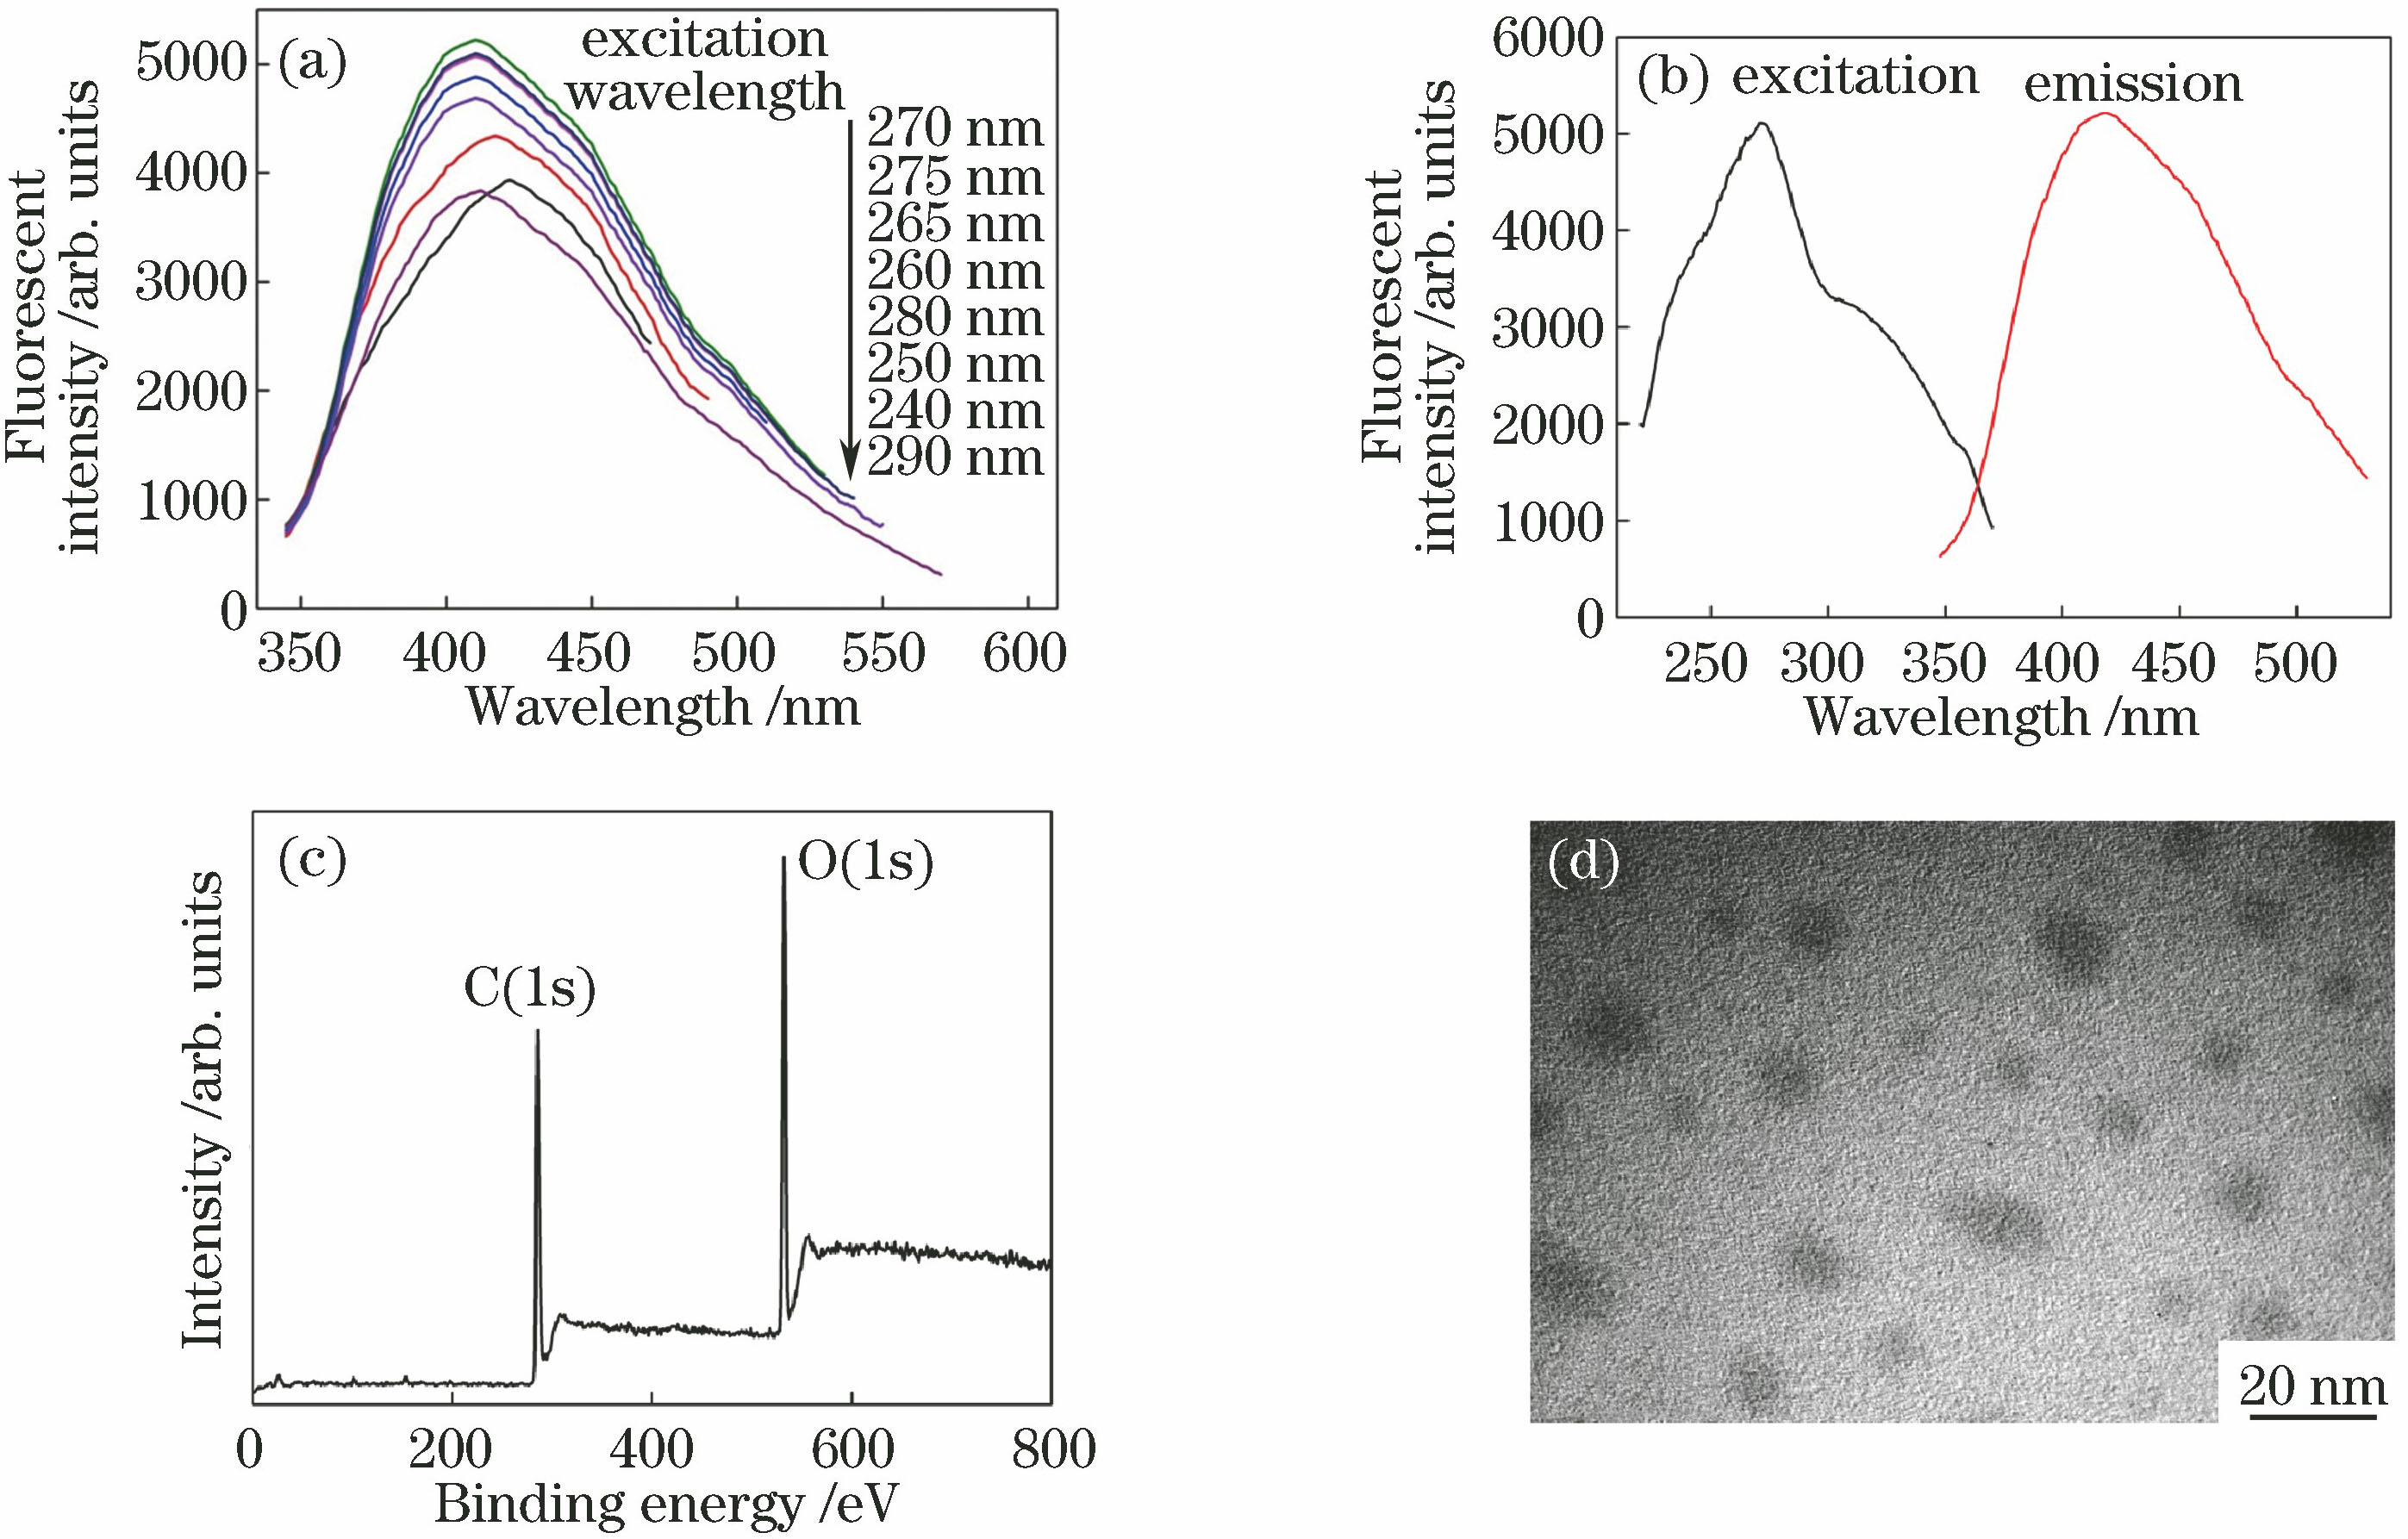 Characterization of fluorescent carbon quantum dots. (a) Fluorescence spectra of carbon quantum dots under different excitation wavelengths; (b) maximum excitation and emission spectra of carbon quantum dots; (c) XPS image of carbon quantum dots; (d) TEM image of carbon quantum dots